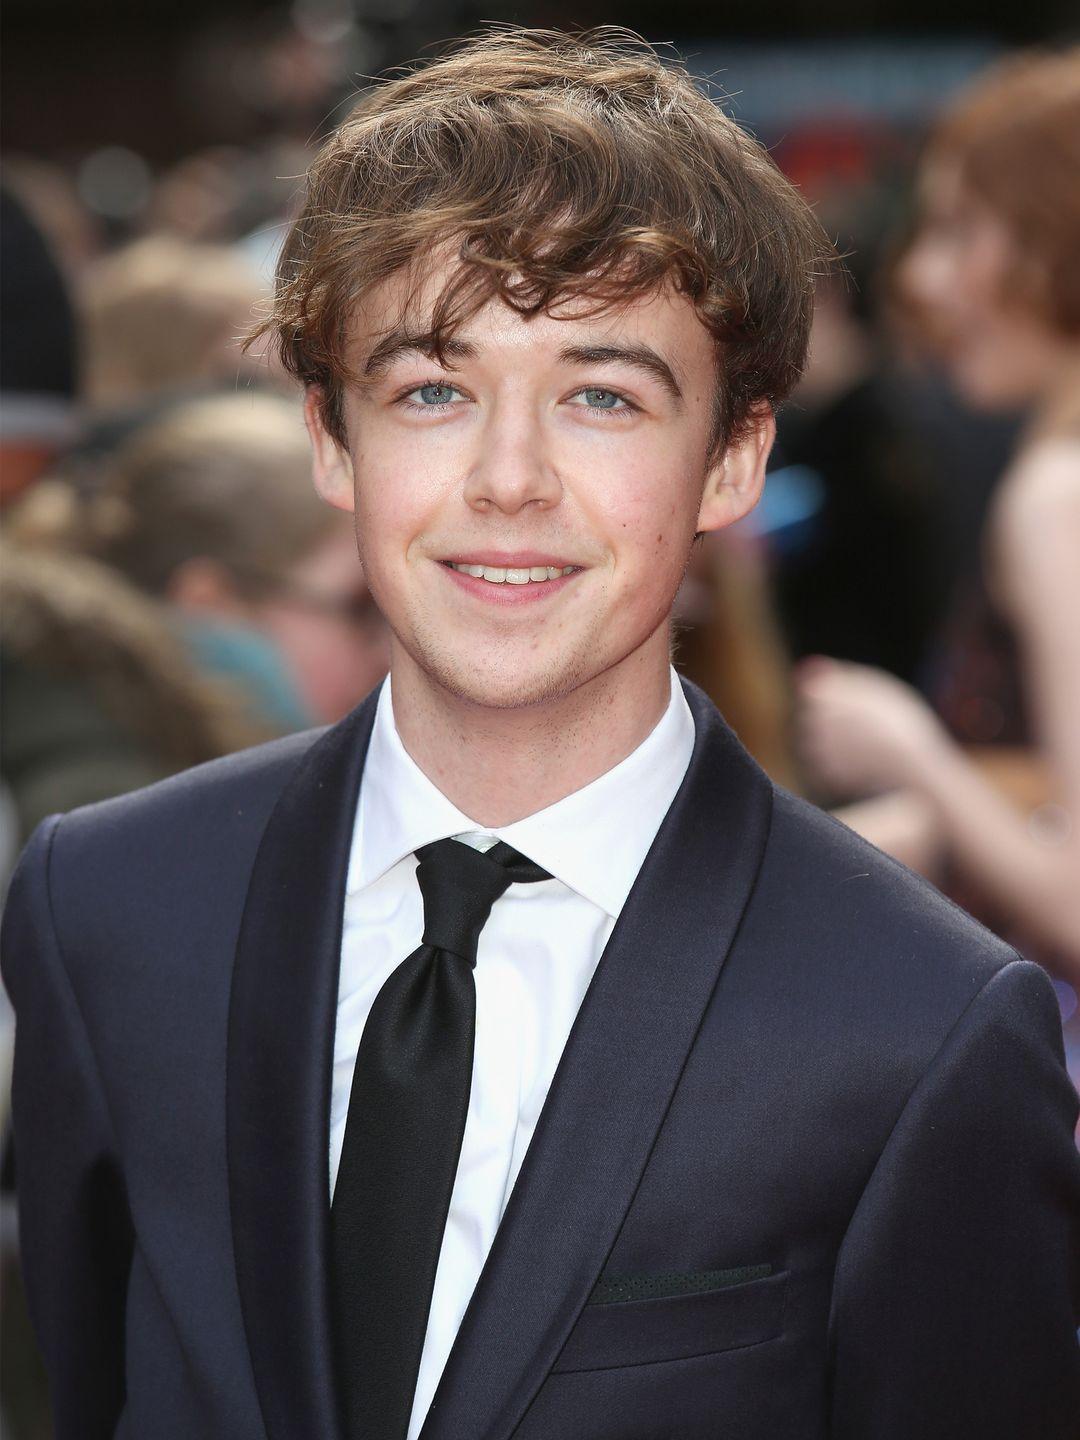 Alex Lawther young age